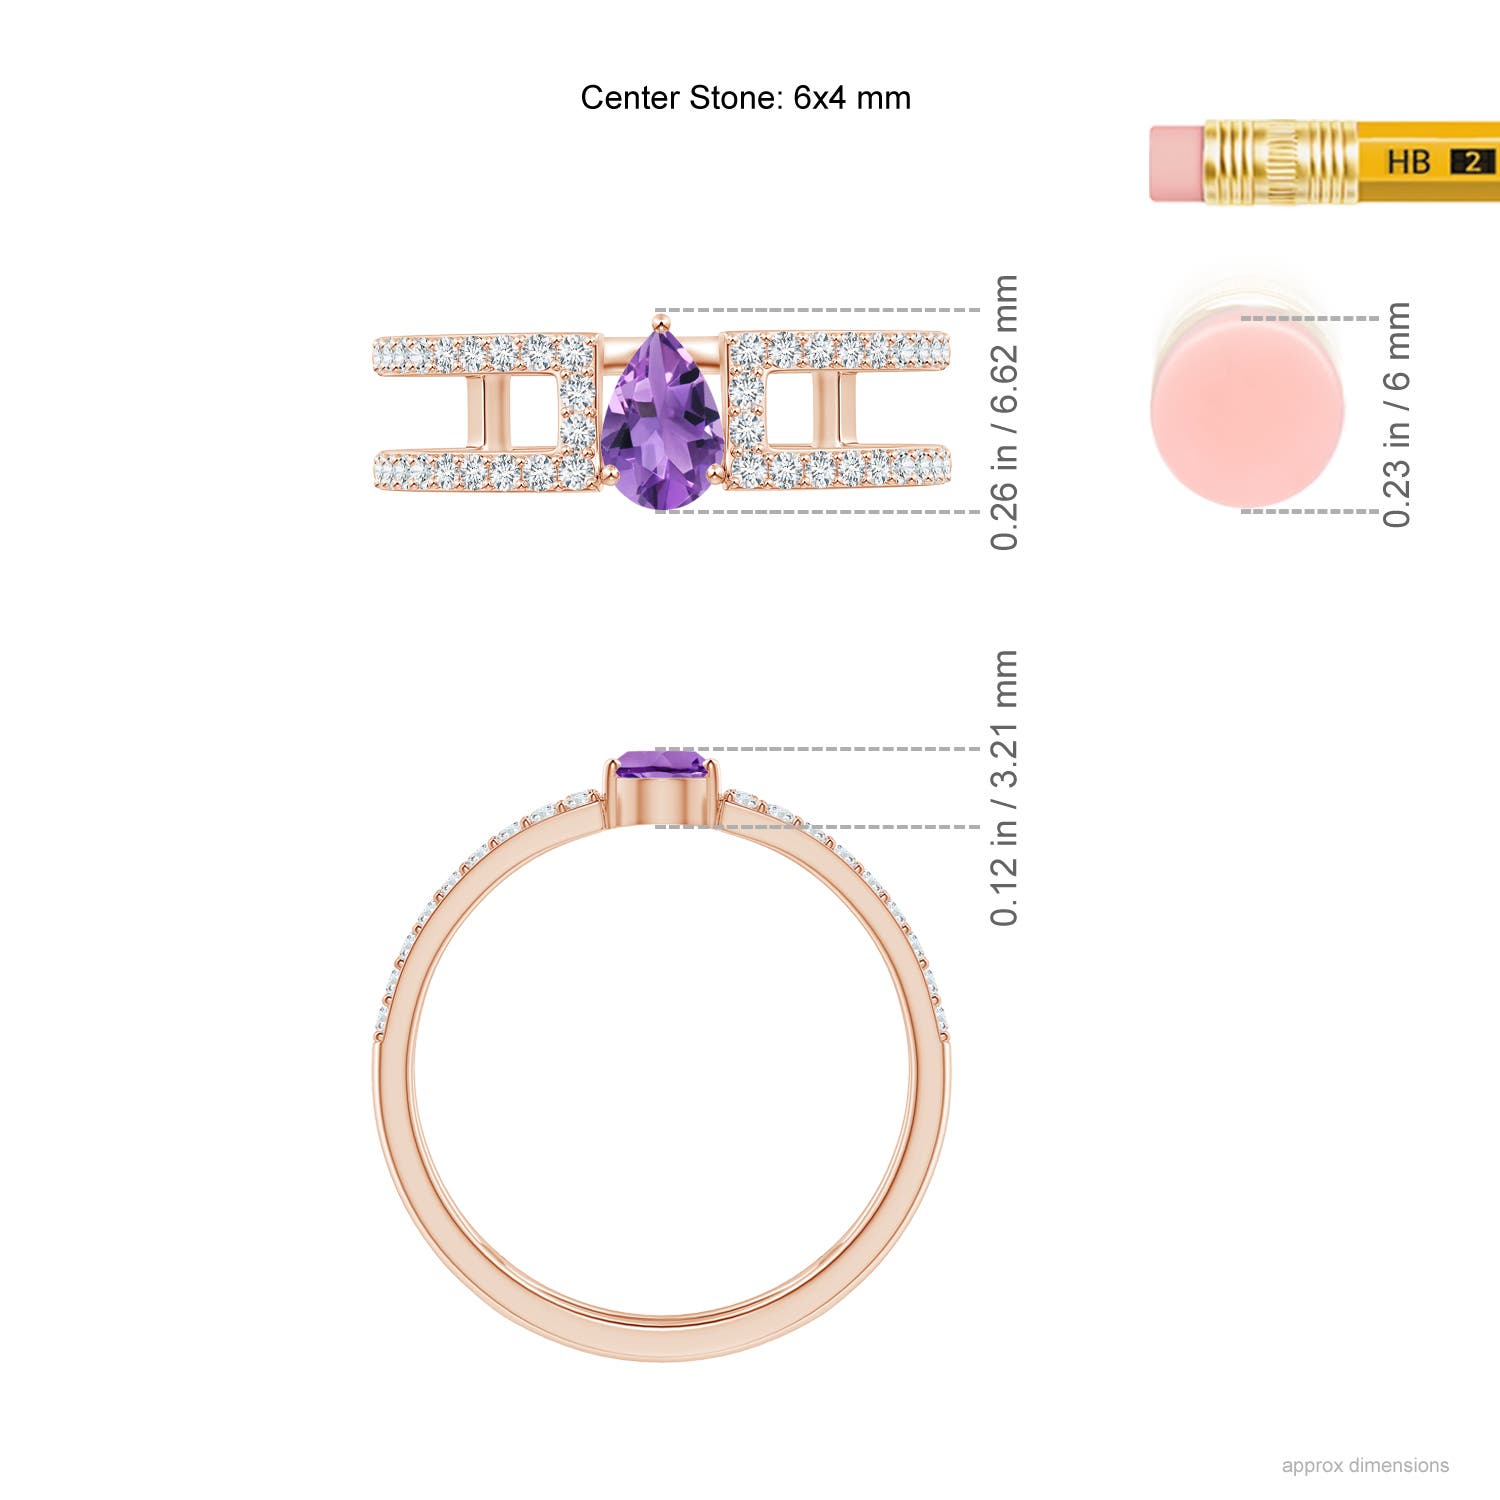 AA - Amethyst / 0.65 CT / 14 KT Rose Gold